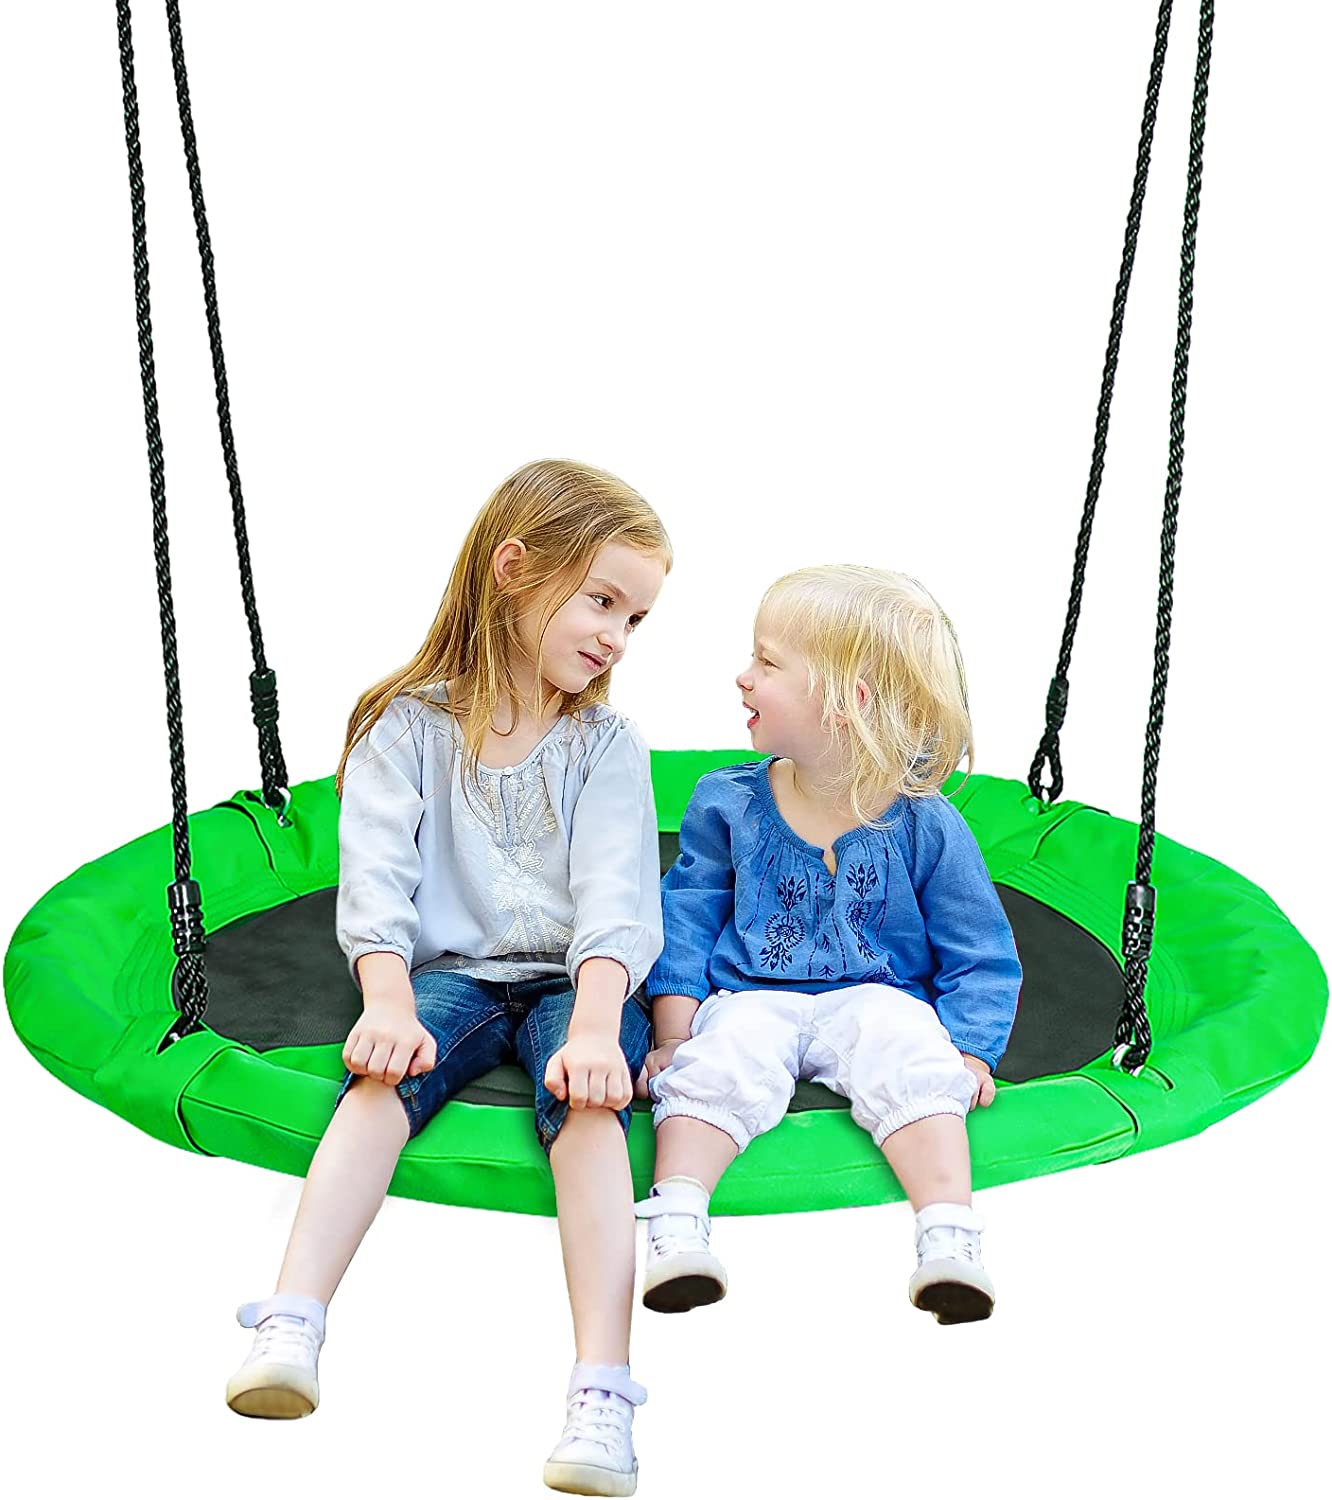 40'' Saucer Swing Web Swing Round Tree Swing for Kids Indoor Outdoor Swing Set 800lb Capacity with Carabiners, Waterproof and Steel Frame